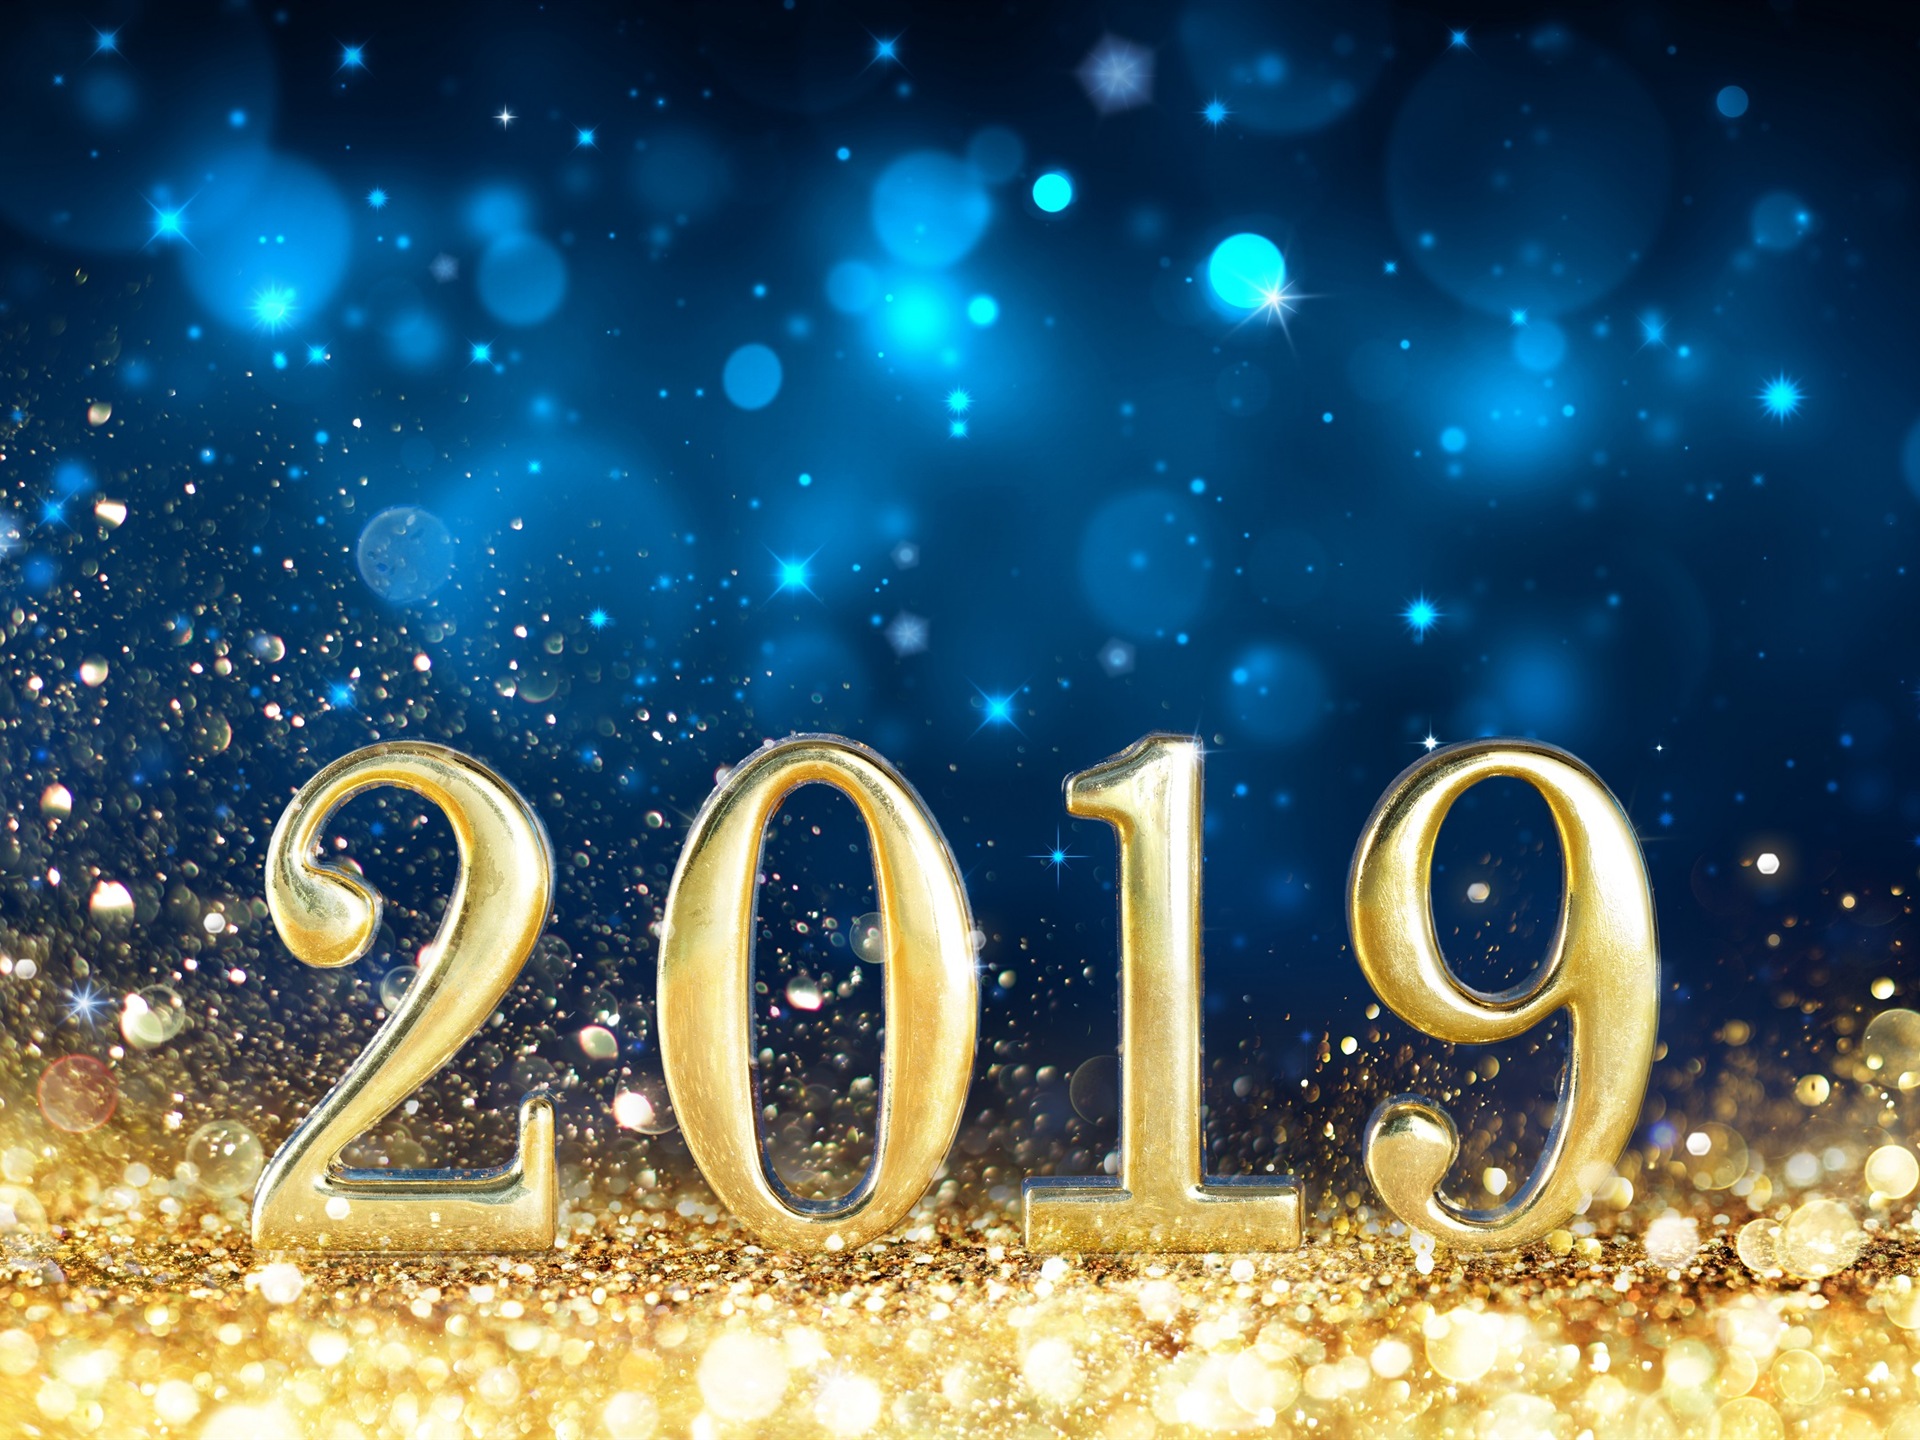 Happy New Year 2019 HD wallpapers #5 - 1920x1440